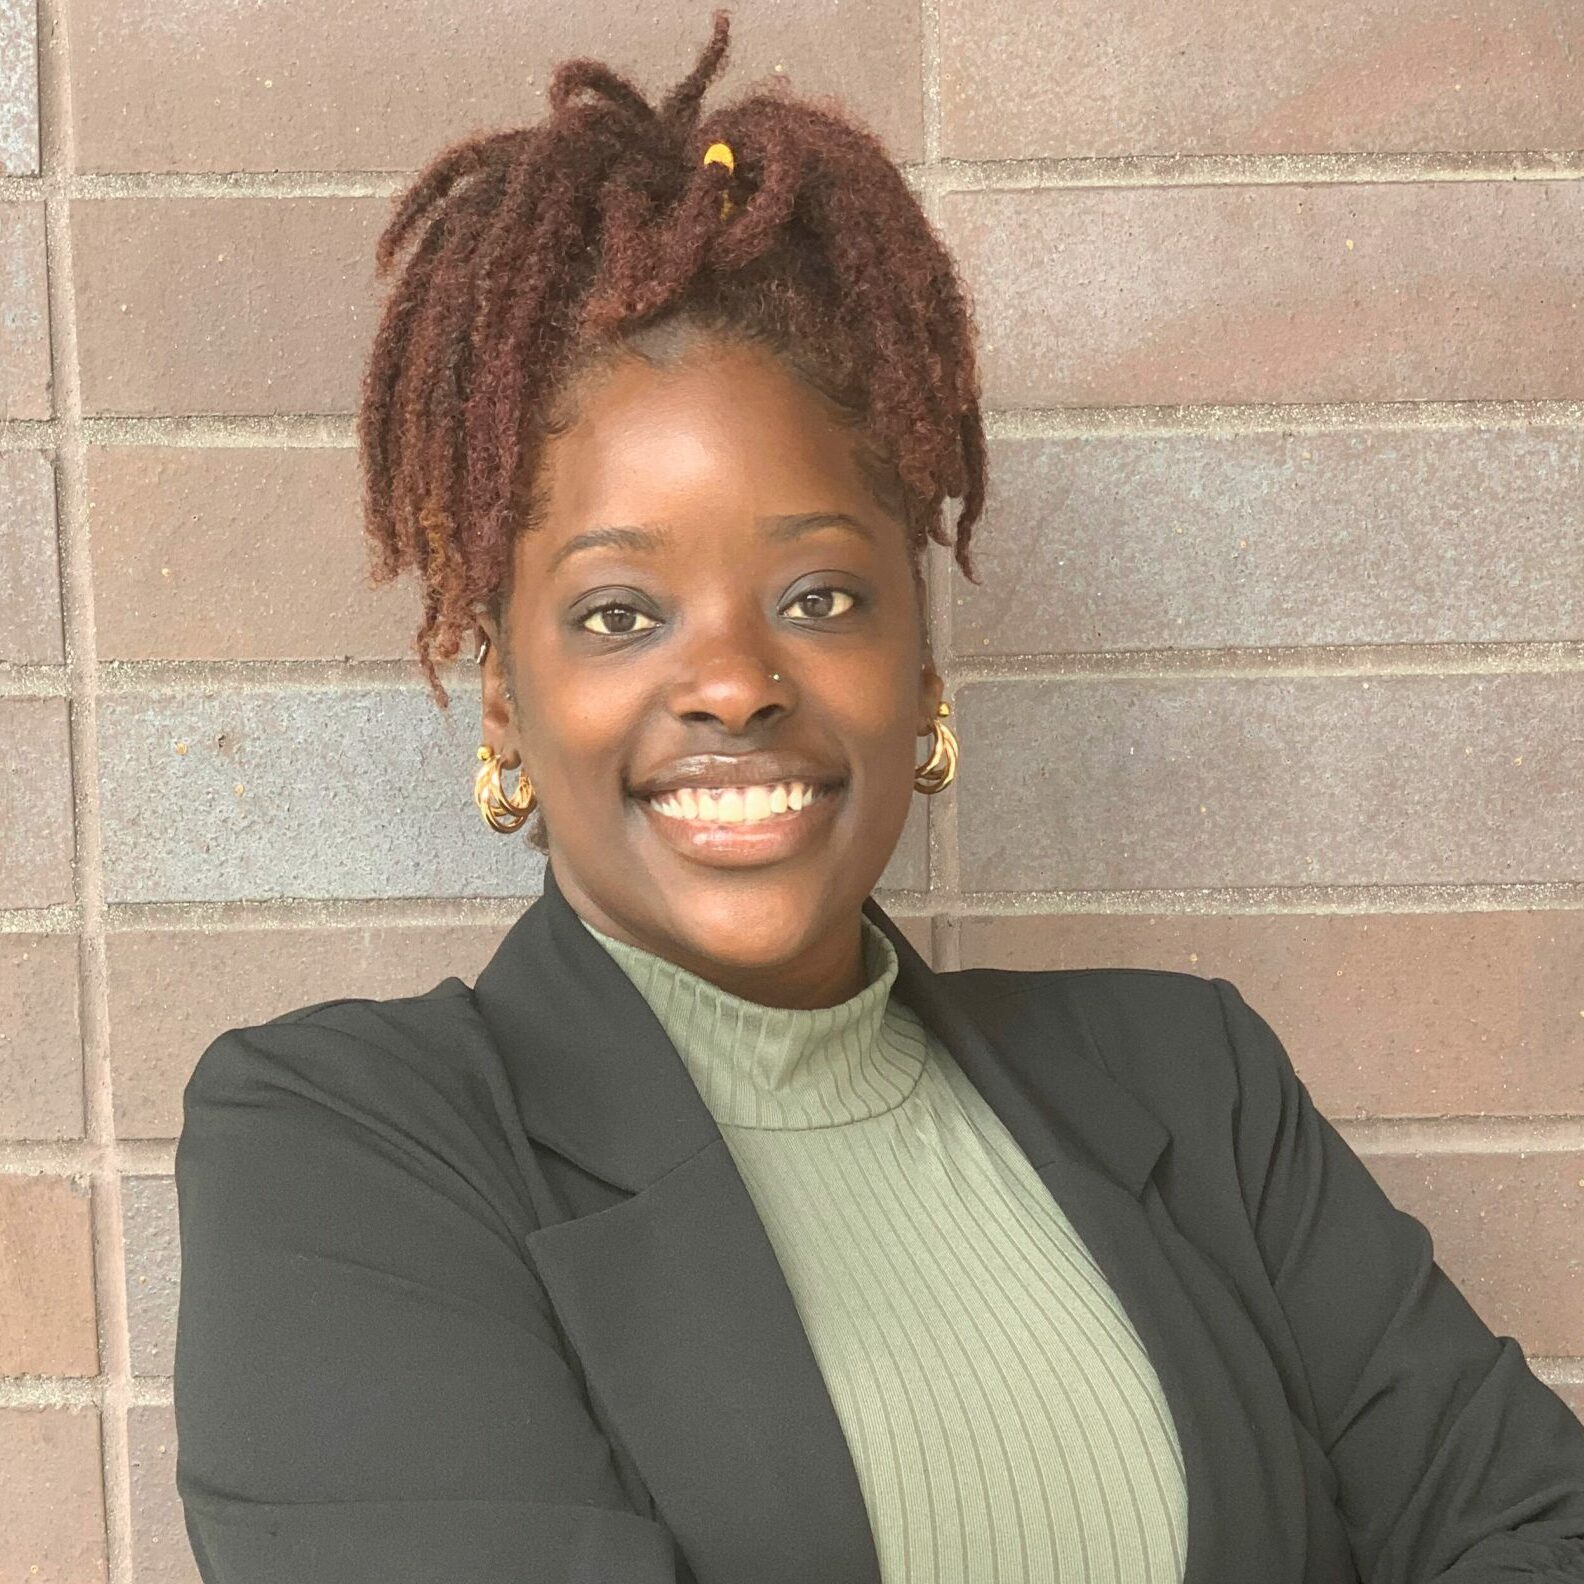 Ashley, a black woman with locs, smiles broadly with her arms crossed over her black suit jacket and green turtleneck.